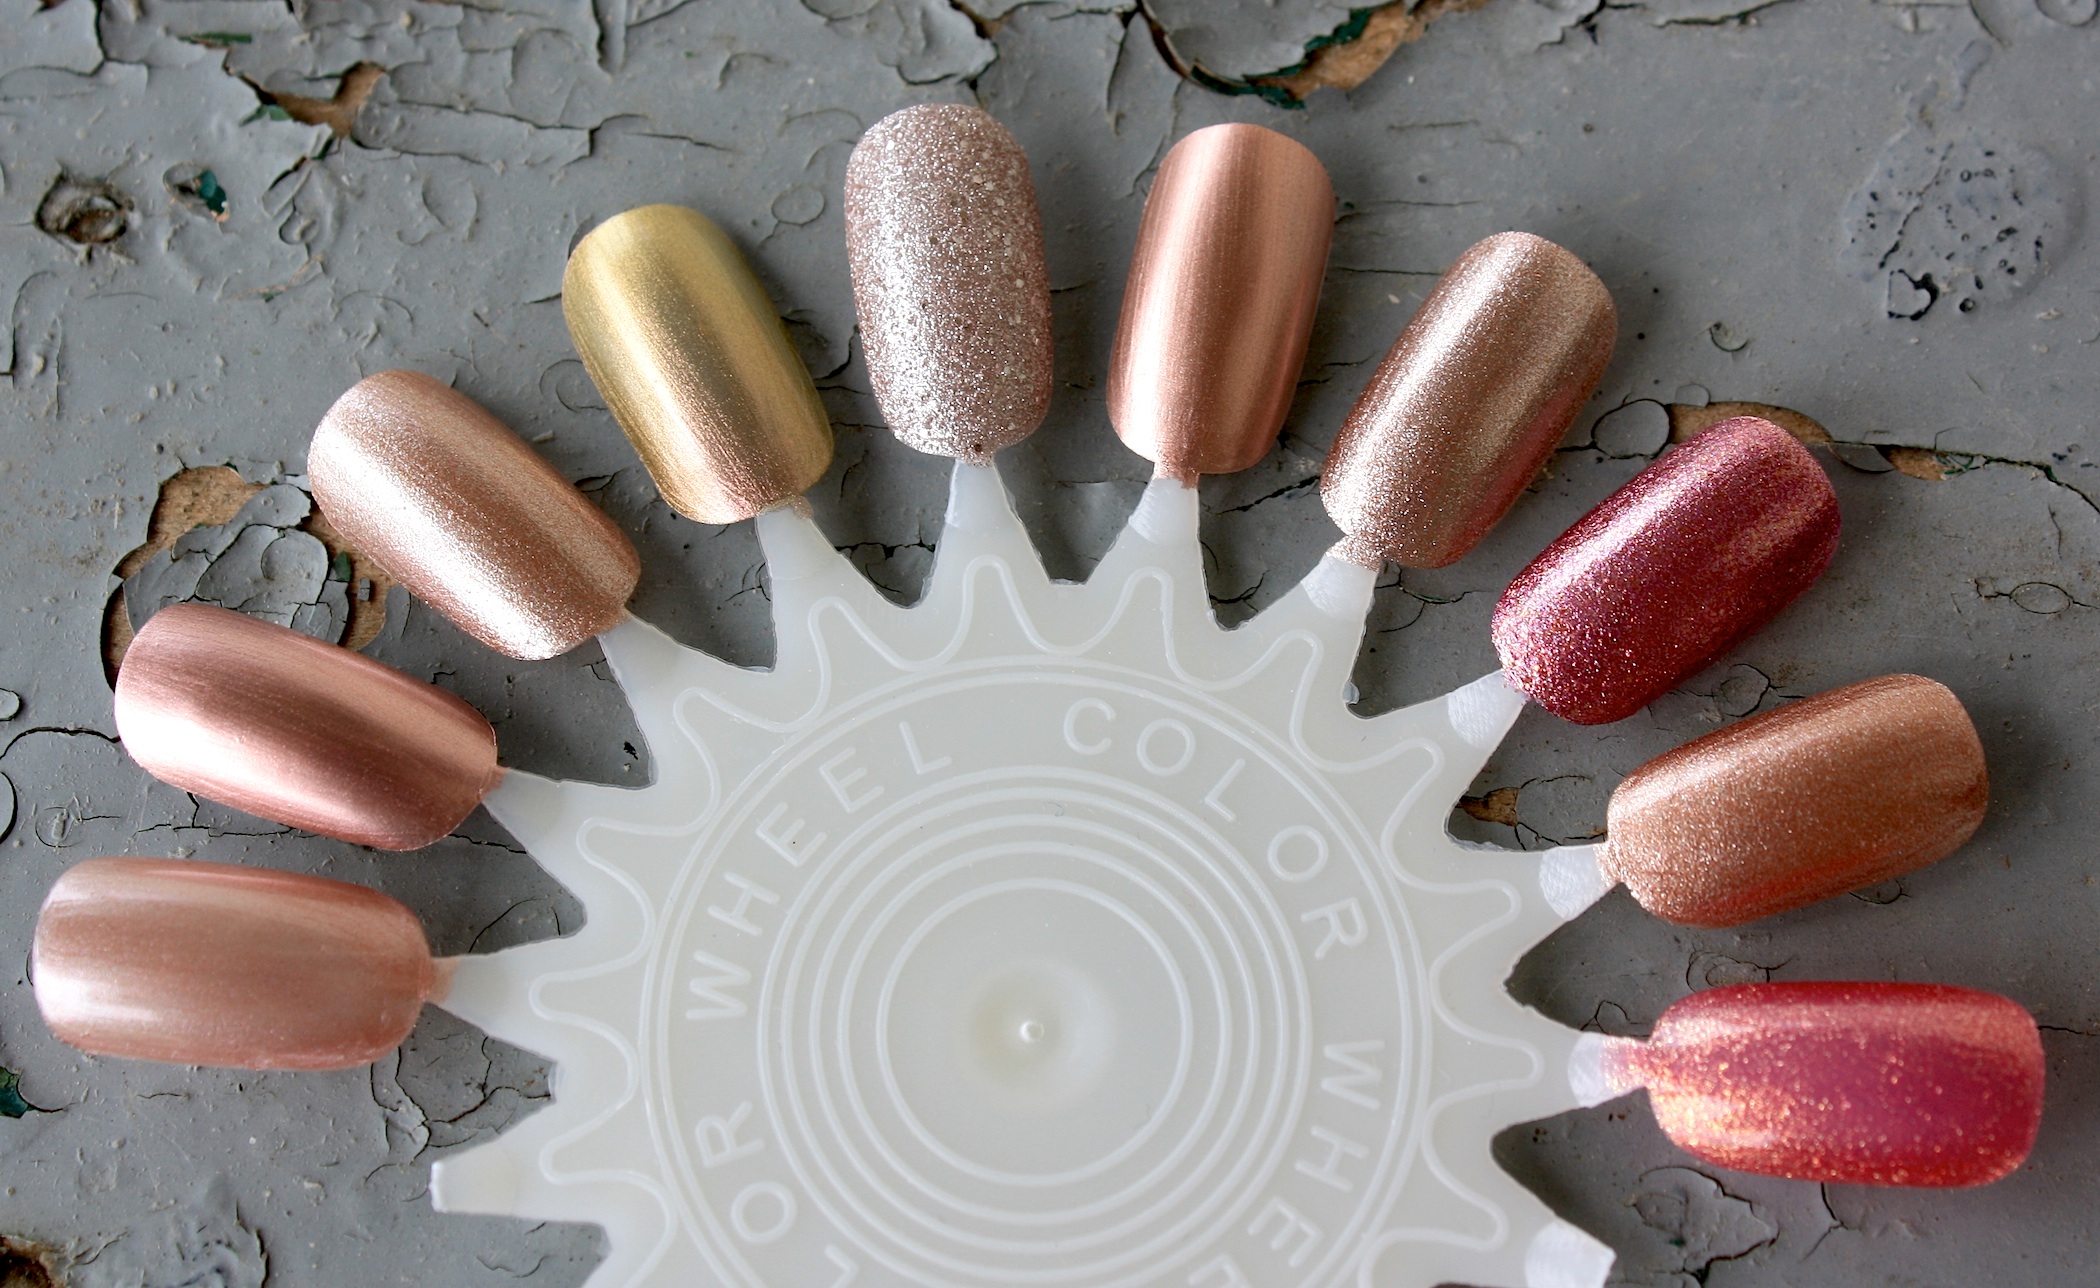 Rose Gold Polish Swatches and Comparisons! – horrendous color